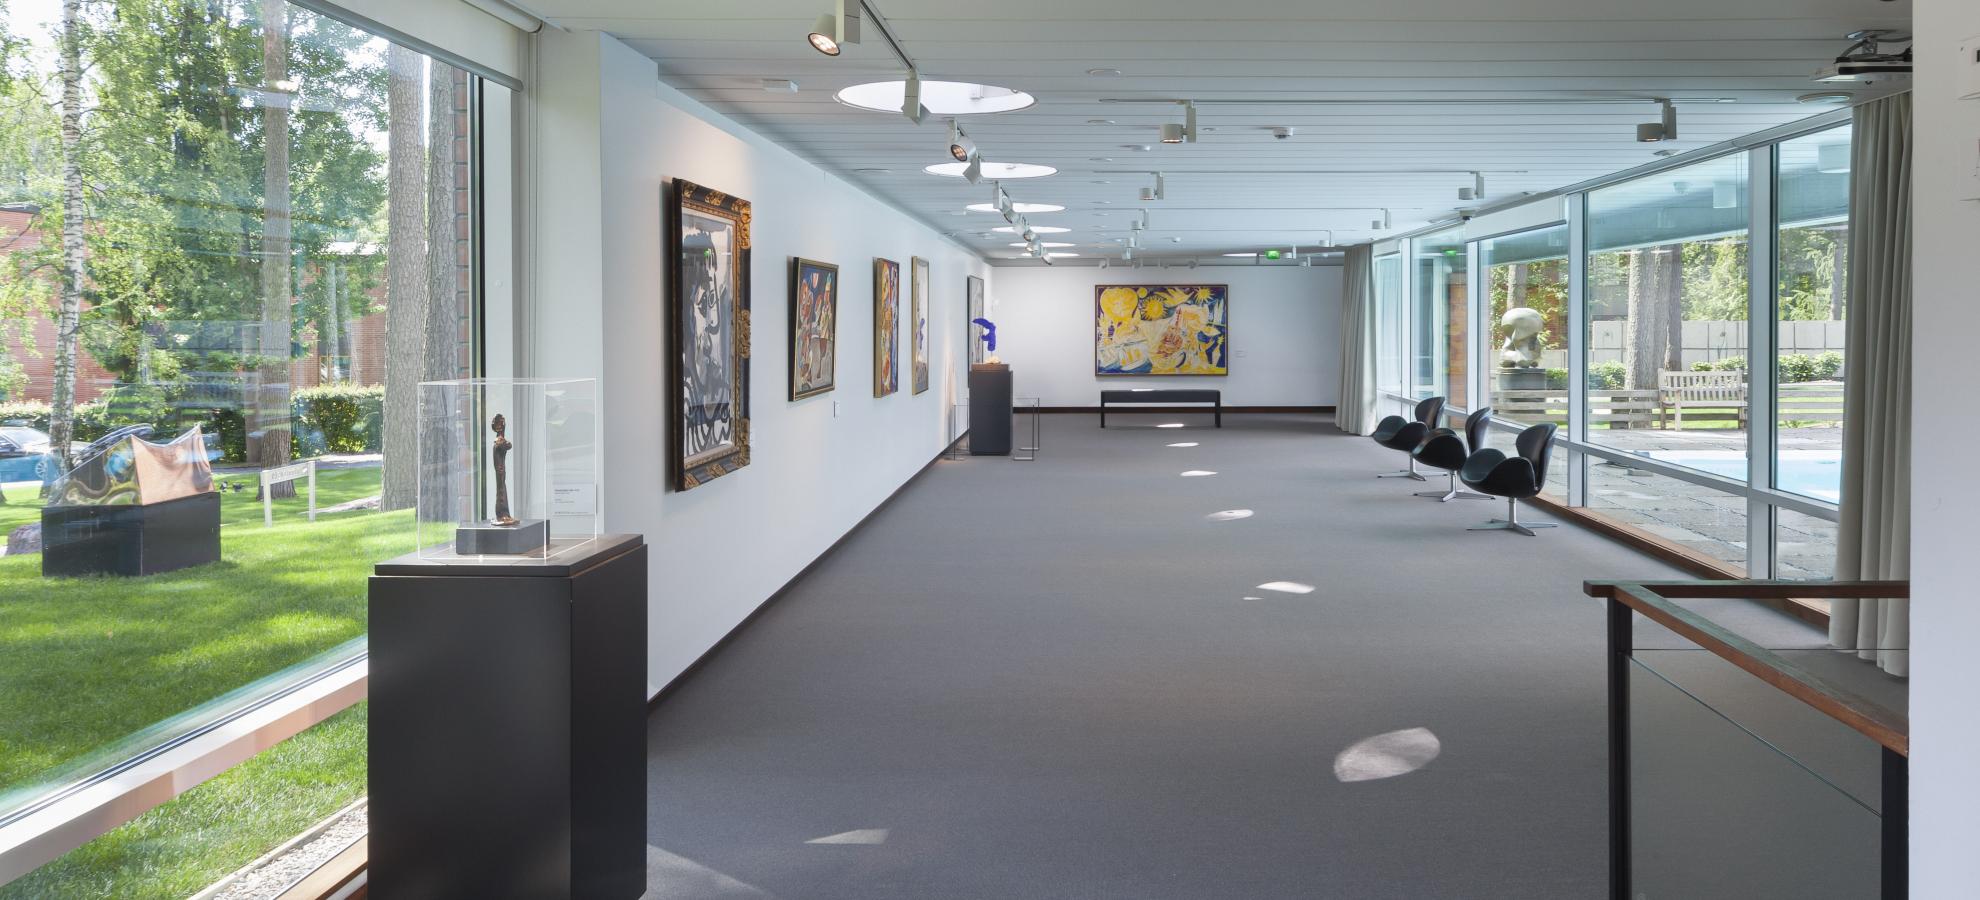 A long exhibition space inside Didrichsen Art Museum, large windows flank either side of an almost empty room, the left and far walls holding a handful of larger paintings together. 